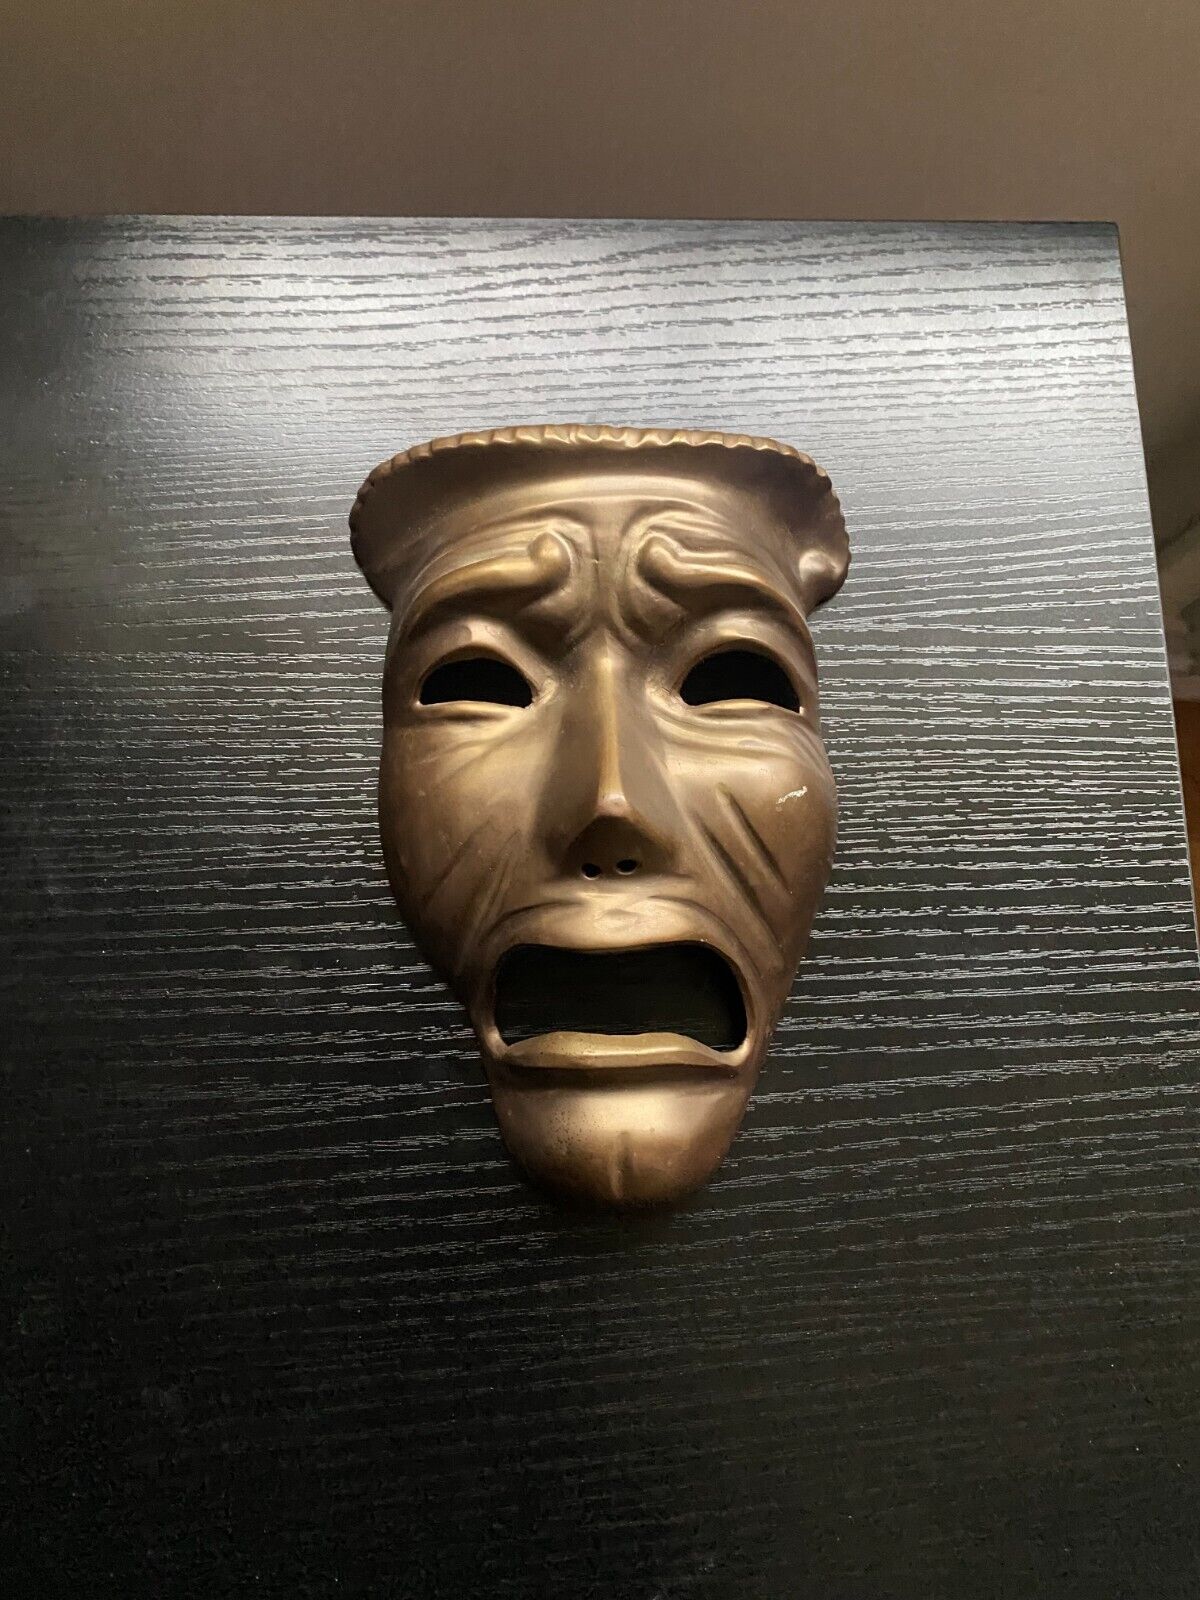 Vtg Solid Brass Comedy Tragedy Mask Drama Theater UNHAPPY Face Wall Art Decor